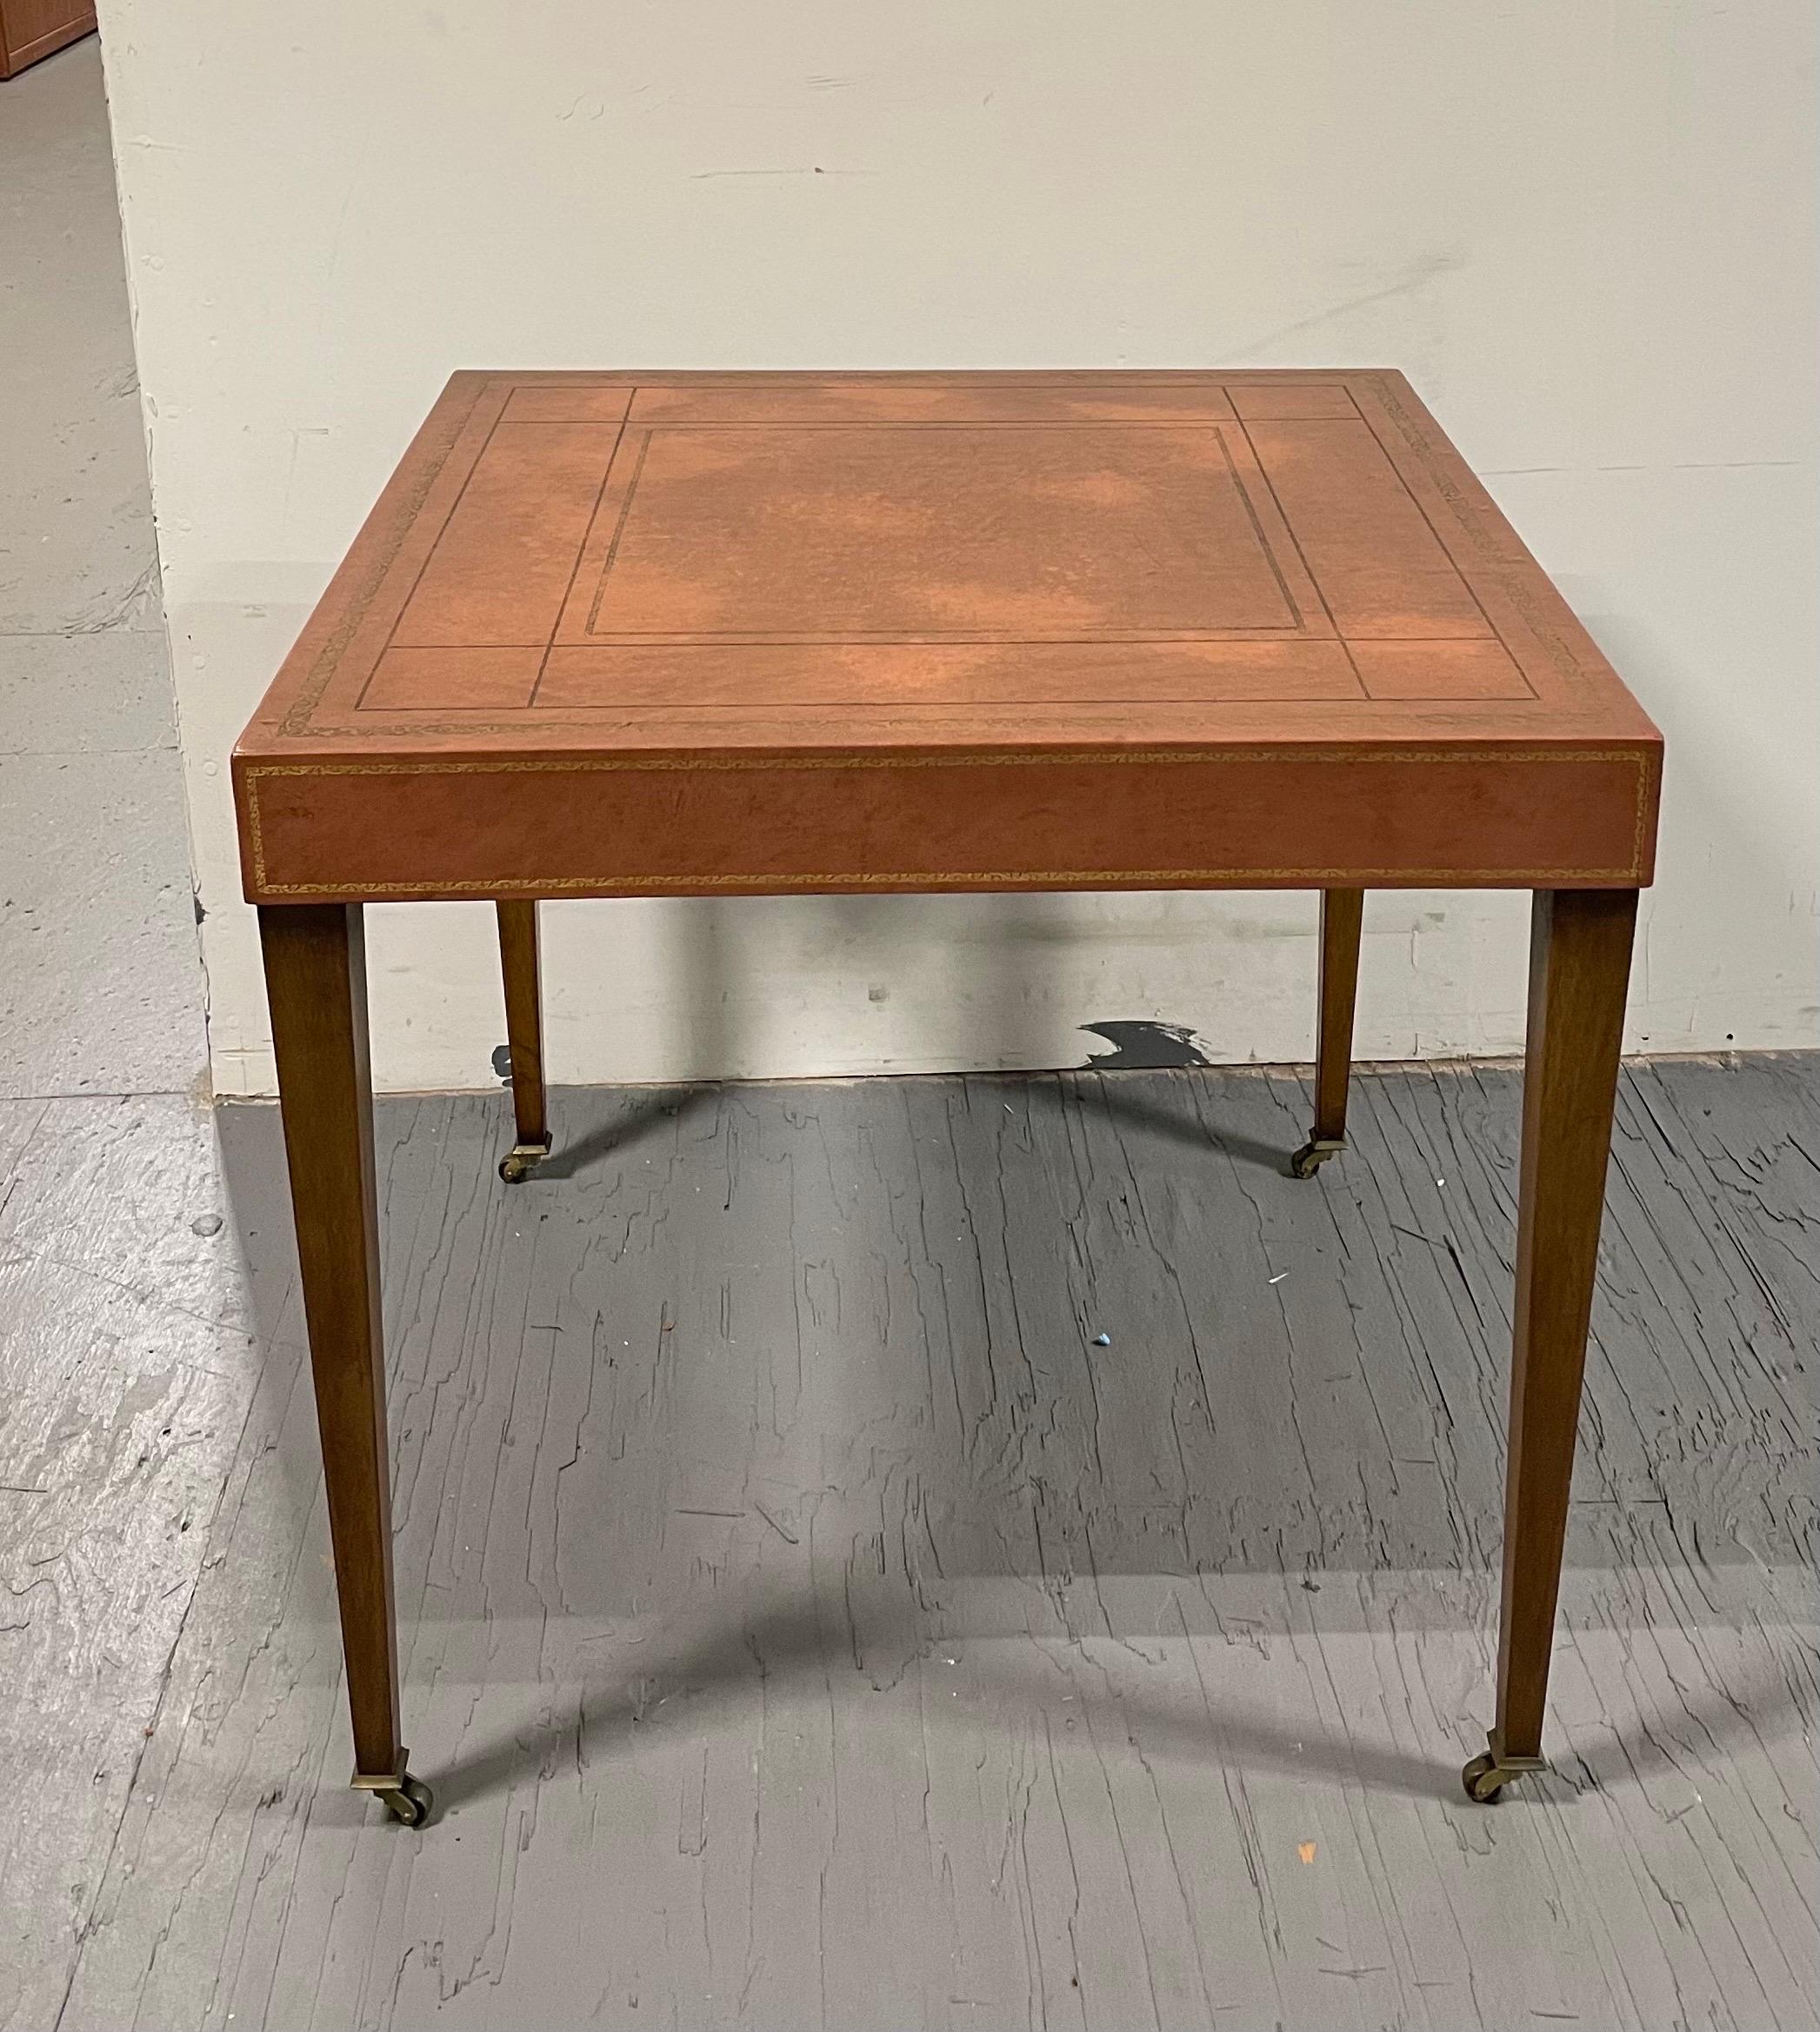 Elegant Tooled Leather Top Game table in the manner of Tommi Parzinger. Great modern linear design. Boxed leather top offset nicely by tapered Hepplewhite style legs and brass casters.
Curbside available to NYC/Philly $350.